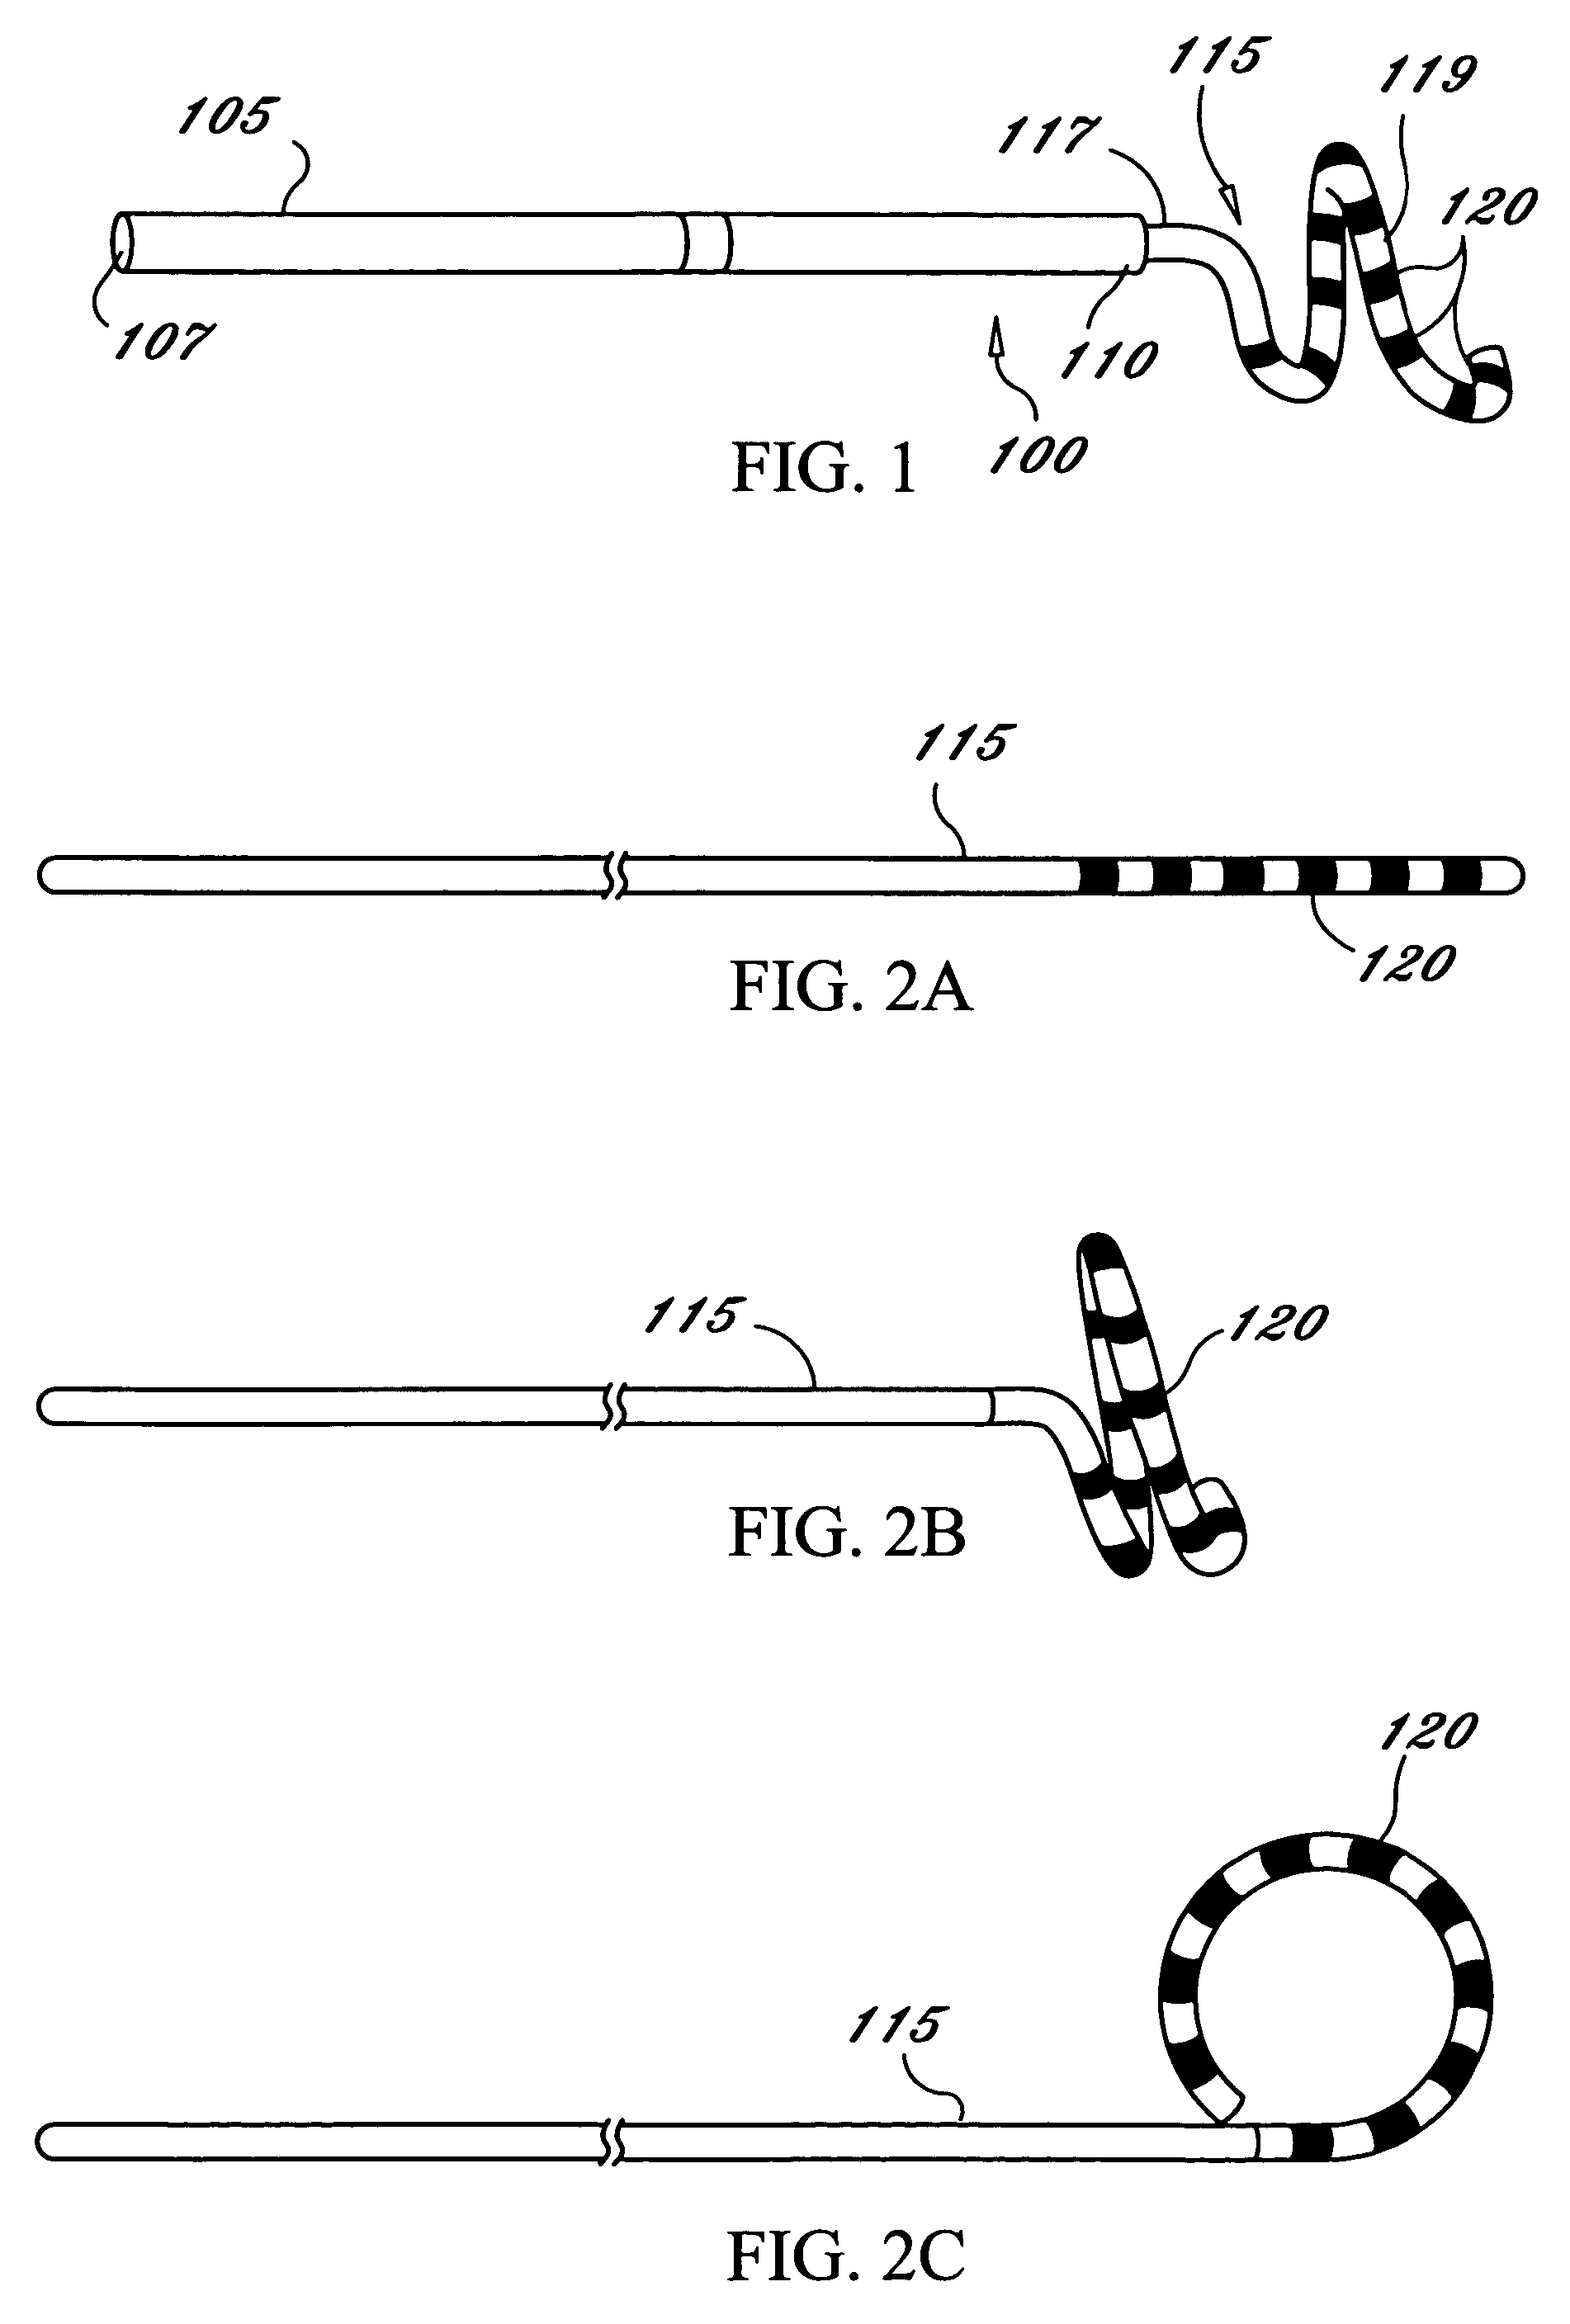 Tissue ablation system including guidewire with sensing element